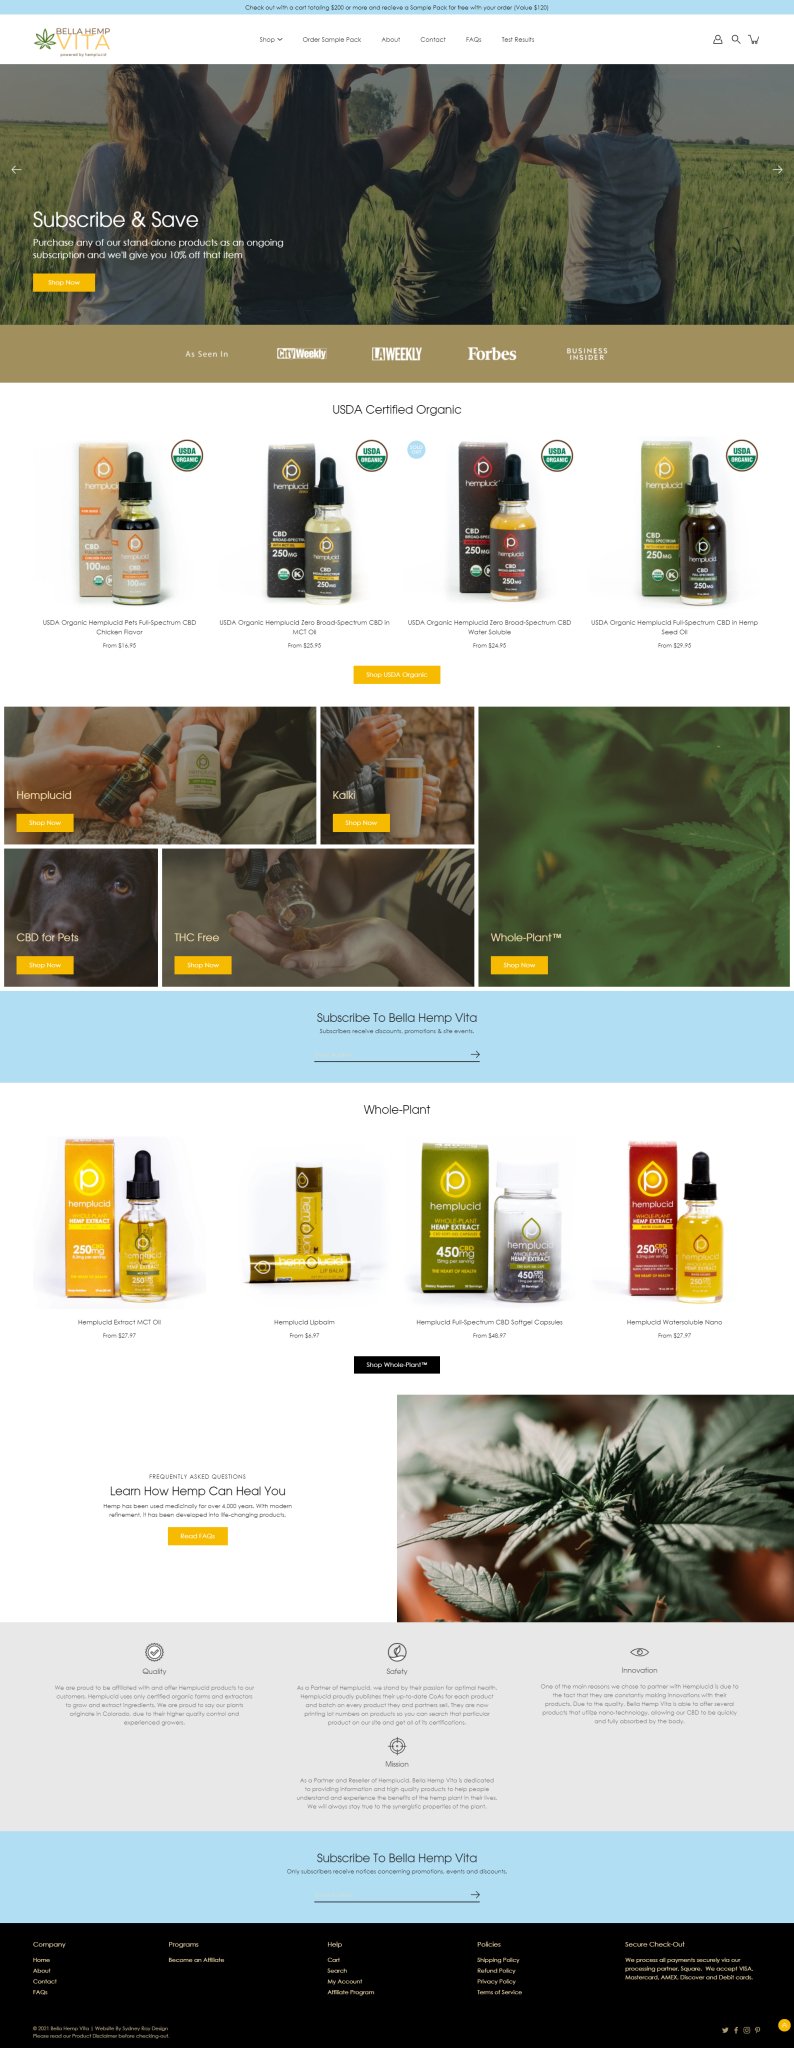 Custom Designed E-Commerce Website - Inventory Size 3 - 10 Products or Services - 7am Epiphany Design &amp; Marketing